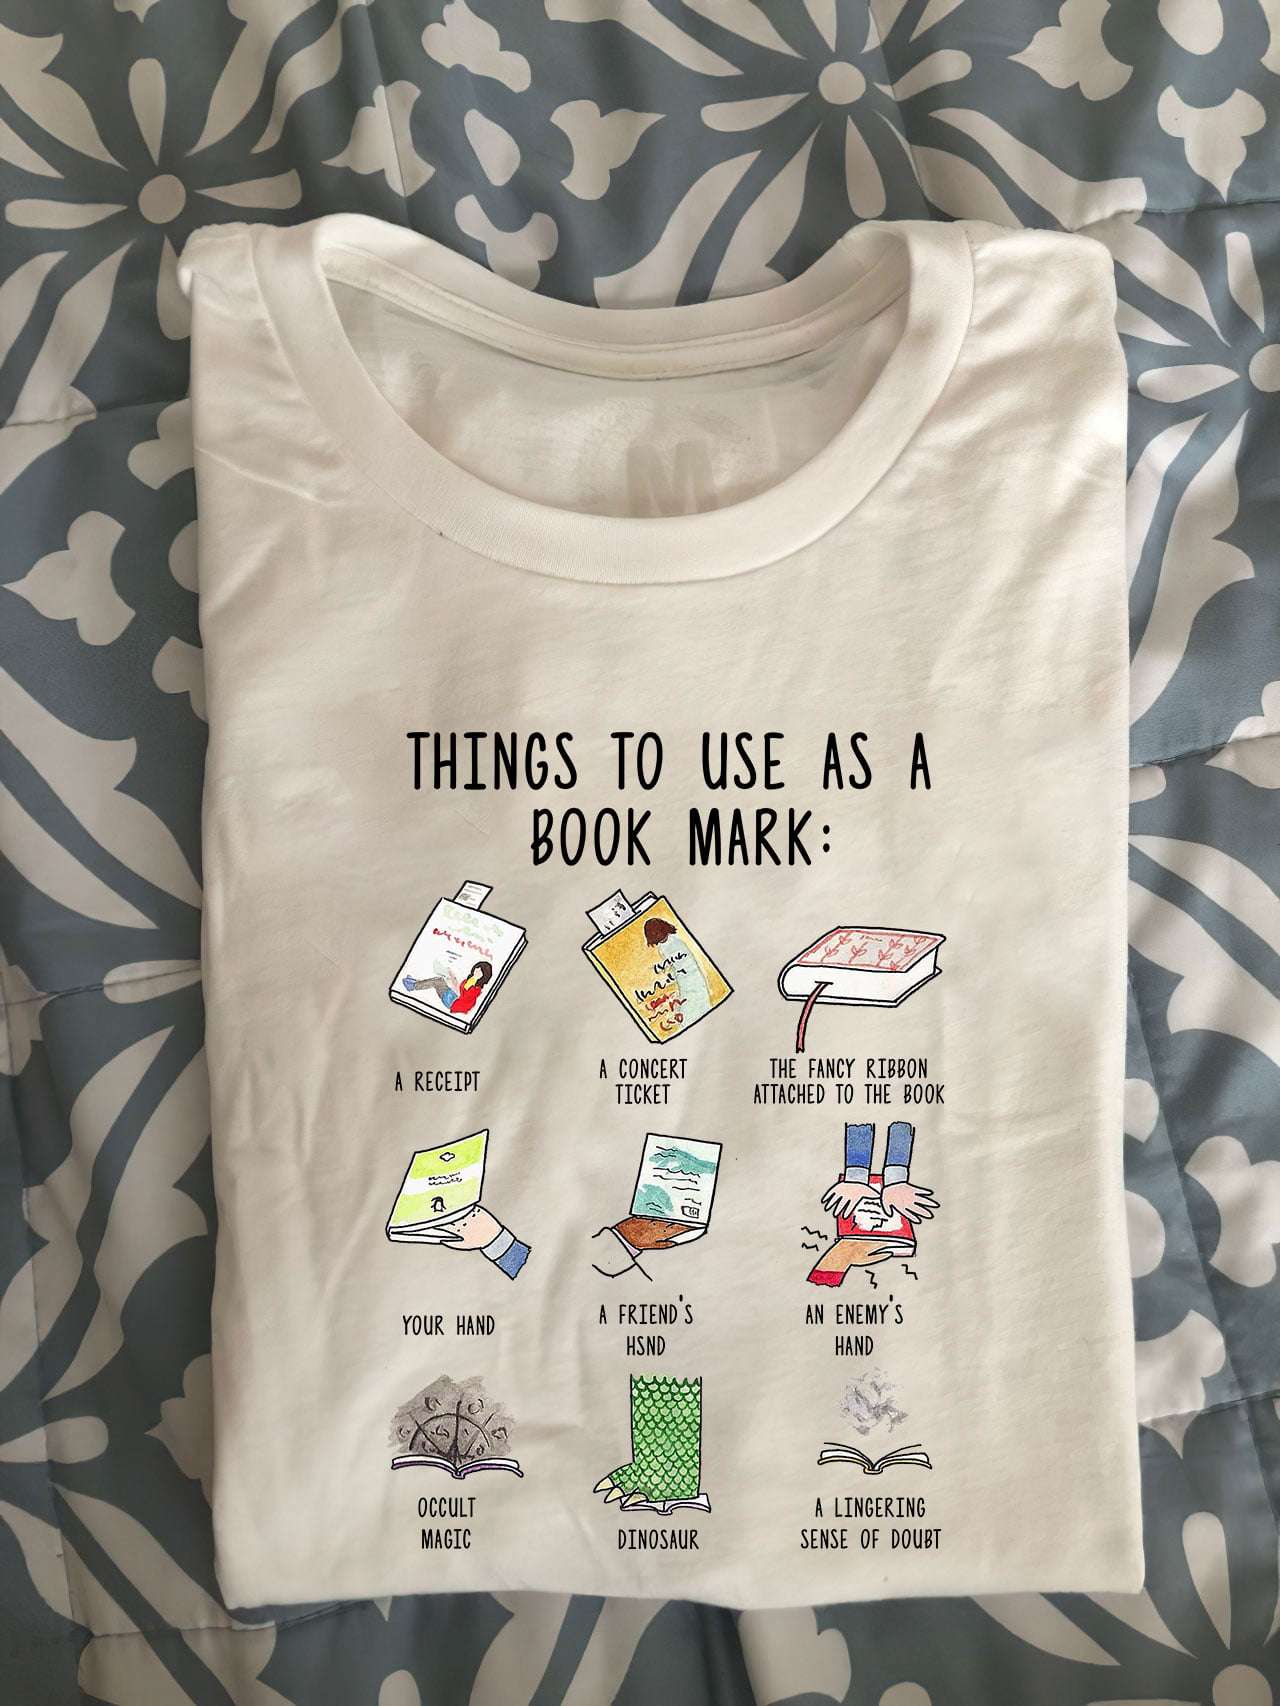 Gift For Bookaholic - Things to use as a book mark: A receipt, a concert ticket, the fancy ribbon attached to the book, your hand, a friend's hsnd